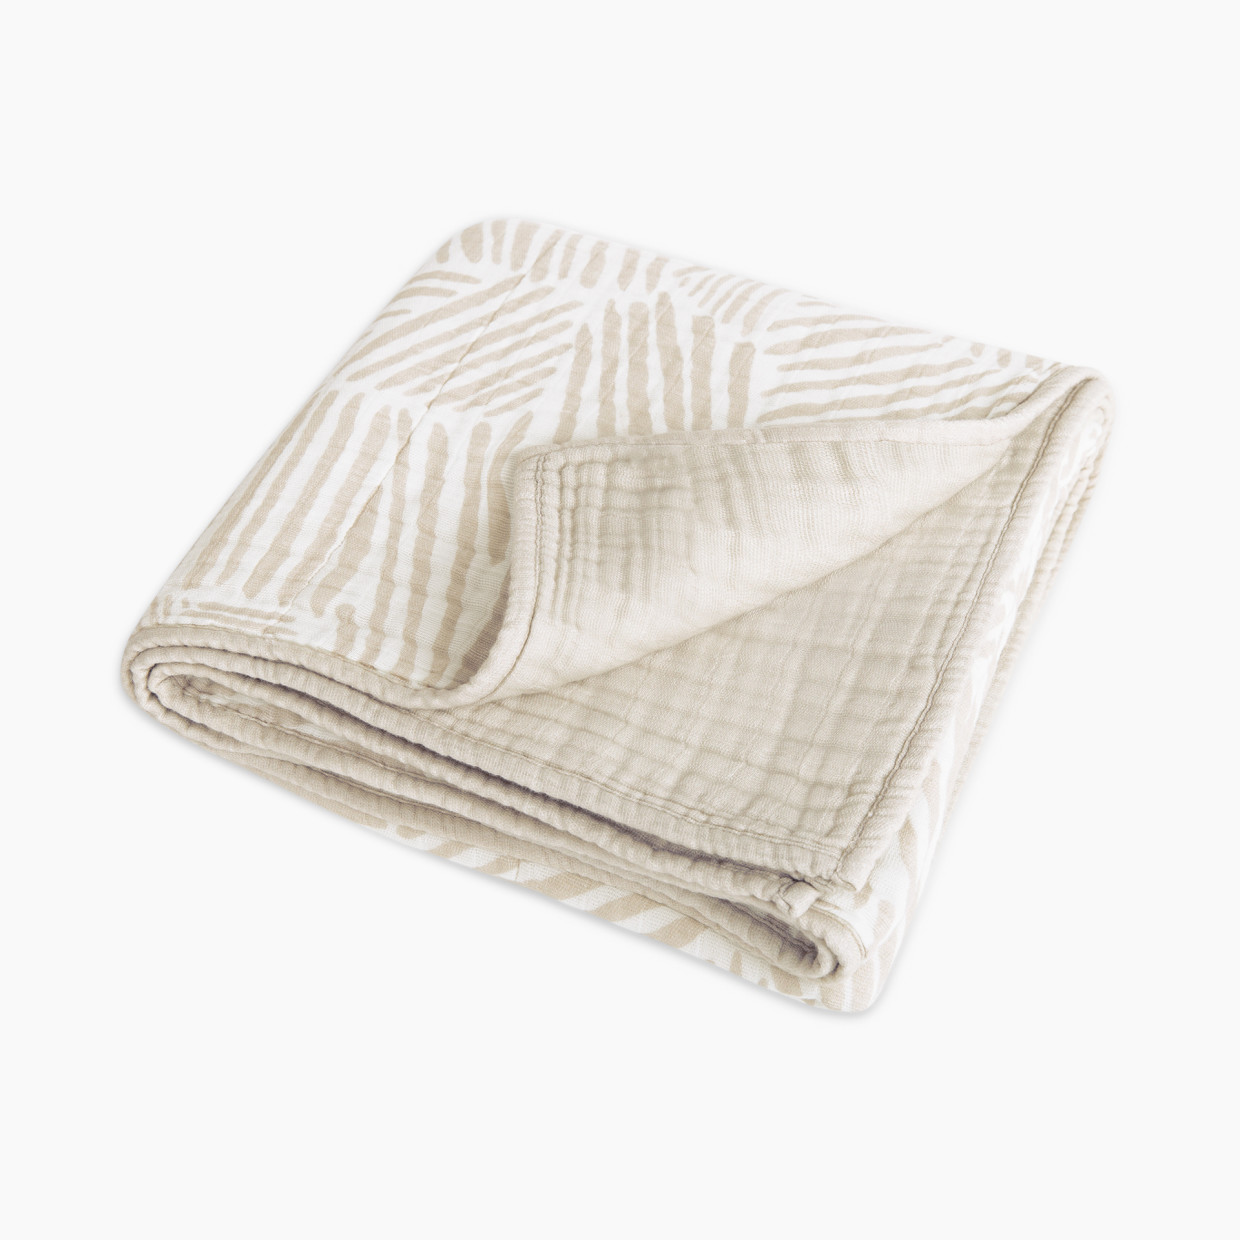 babyletto Quilt in 3-Layer GOTS Certified Organic Muslin Cotton - Oat Stripe.